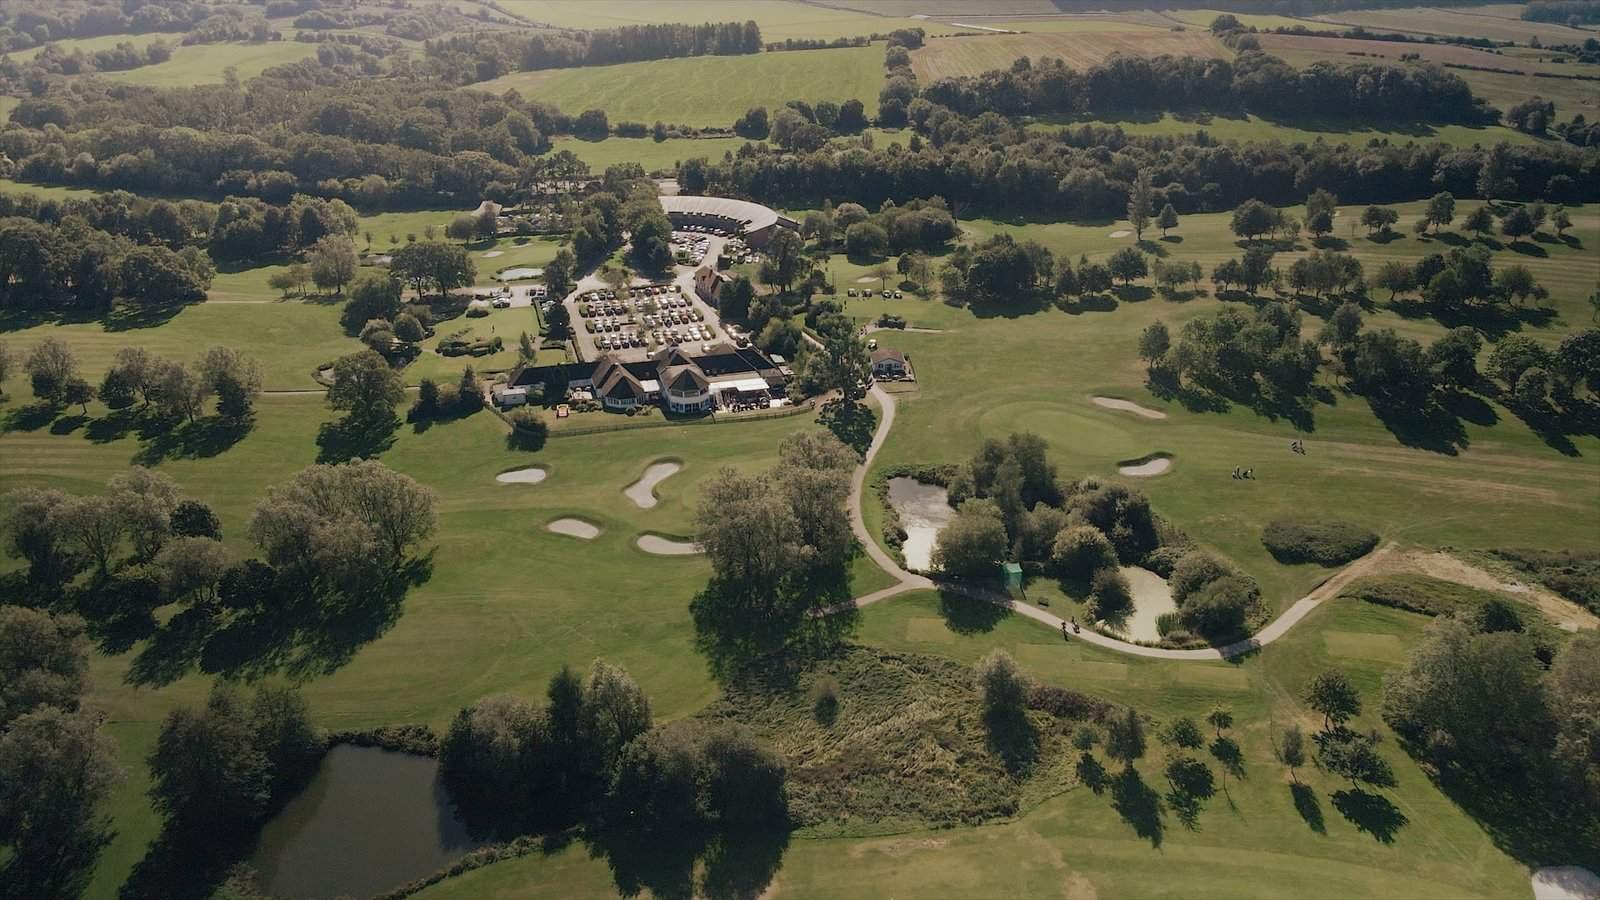 Aerial view of Sandford Springs in Hampshire during a beautiful wedding day. The stunning drone shot captures the elegance of the venue and the joyous celebration unfolding below